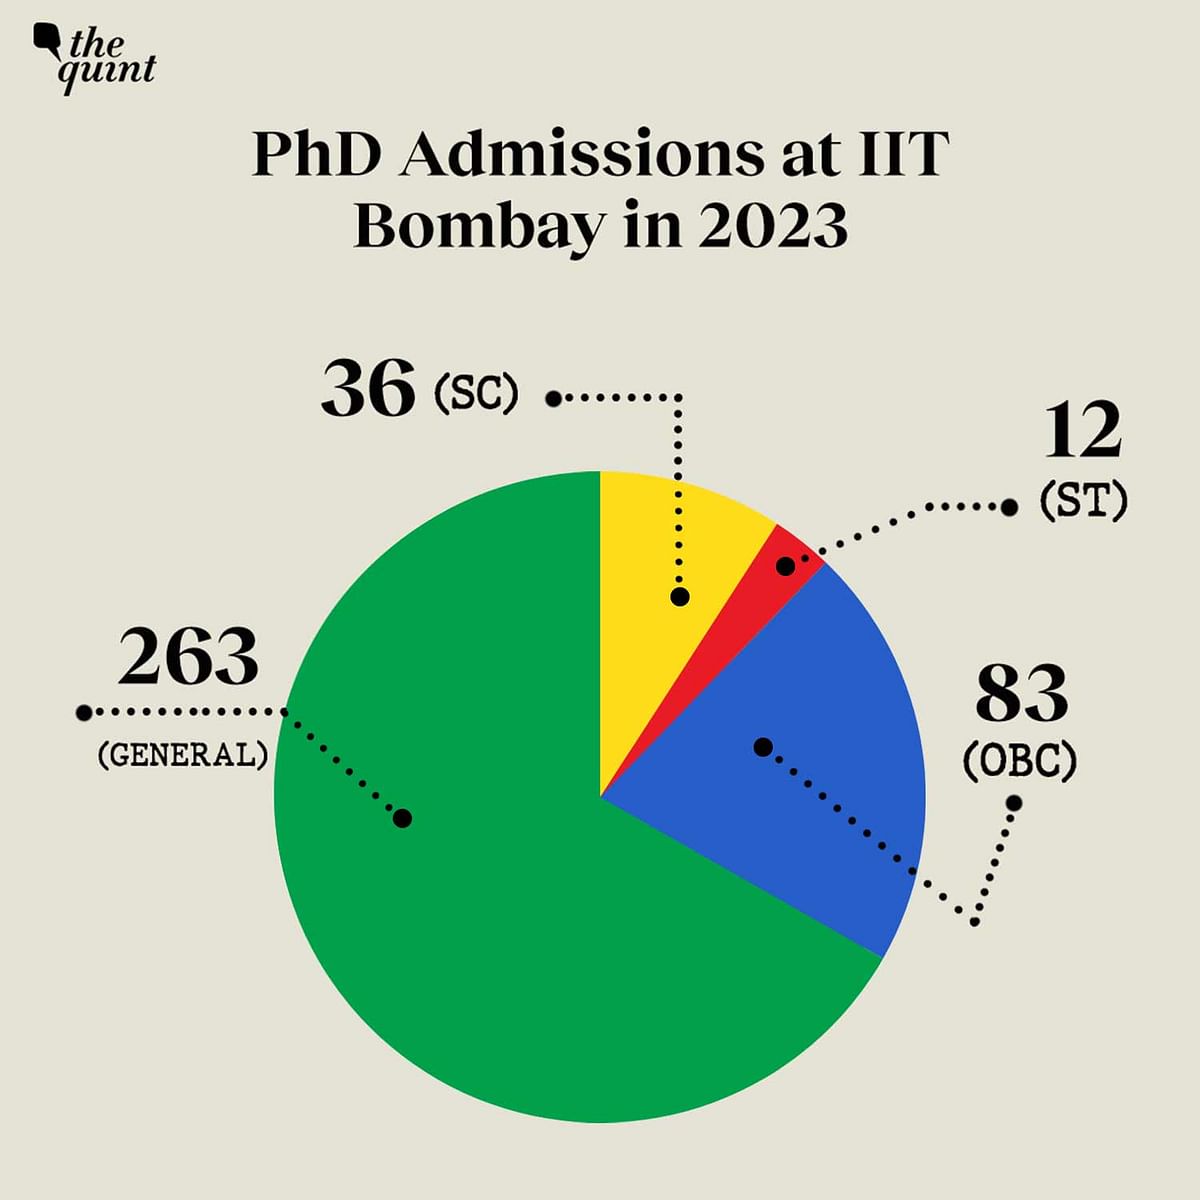 Let’s take a look at what the data from the RTI response indicates about SC/ST/OBC representation across IITs.